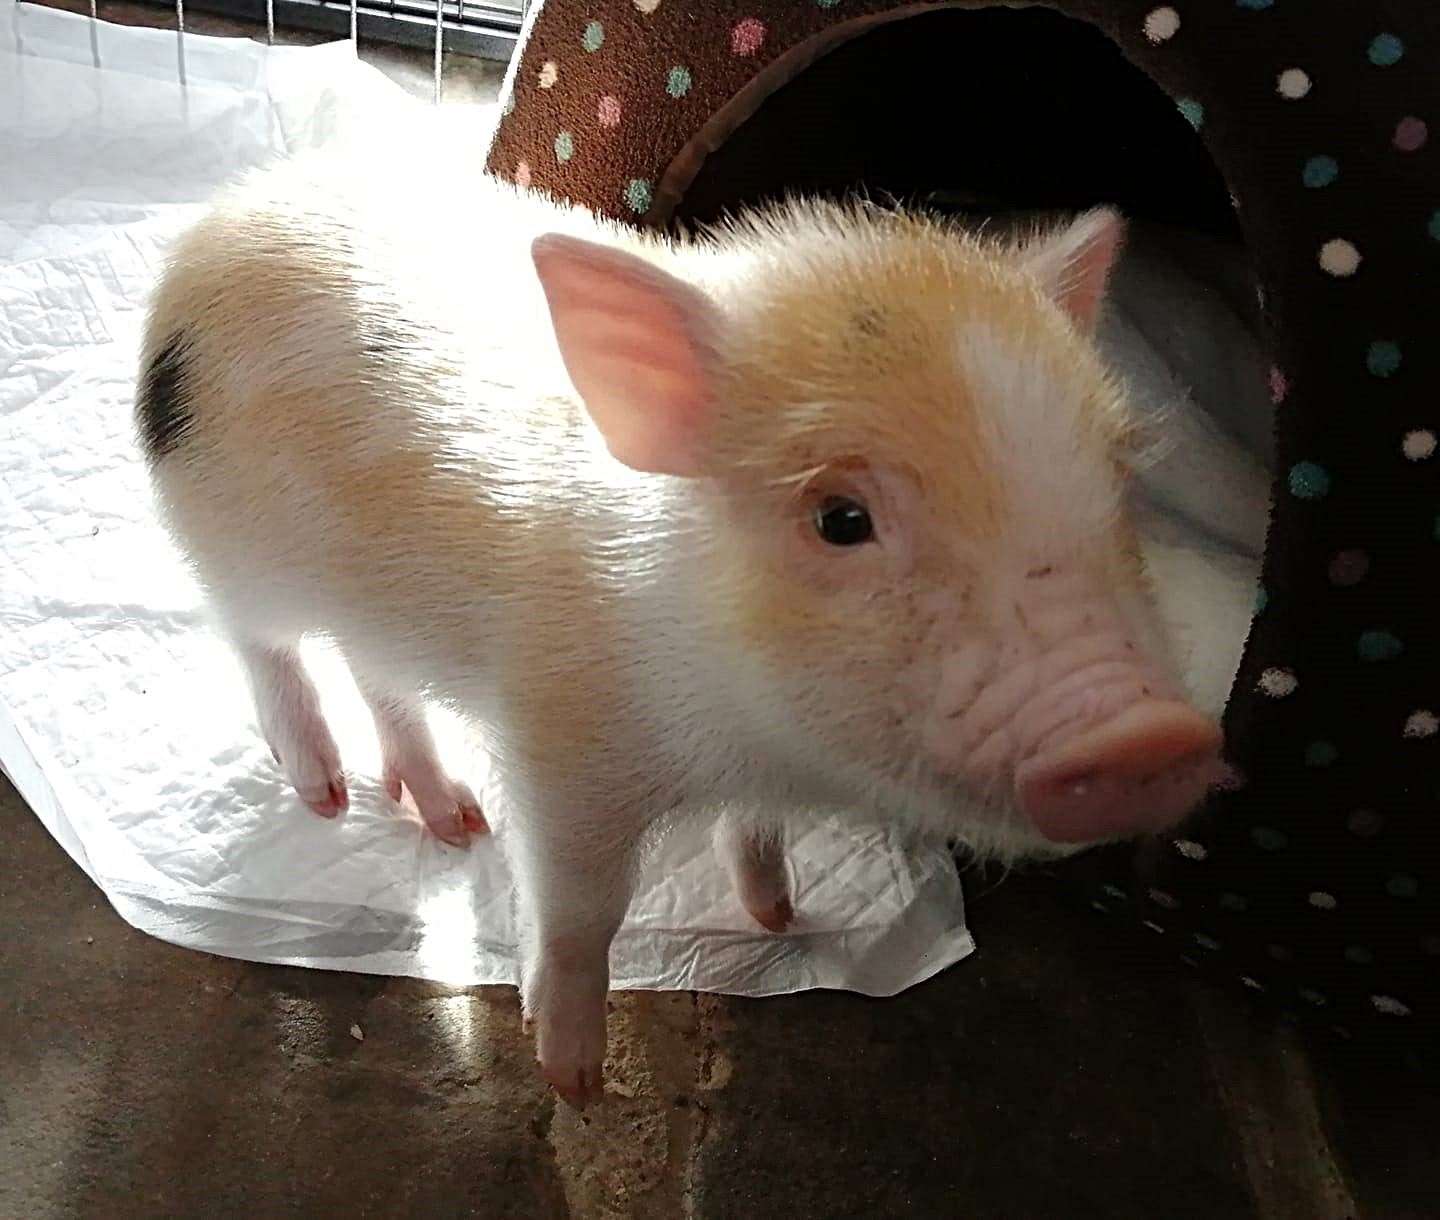 Wilbur the rescue pig who will spend his days in Anim-Mates rescue in Ash (23452714)